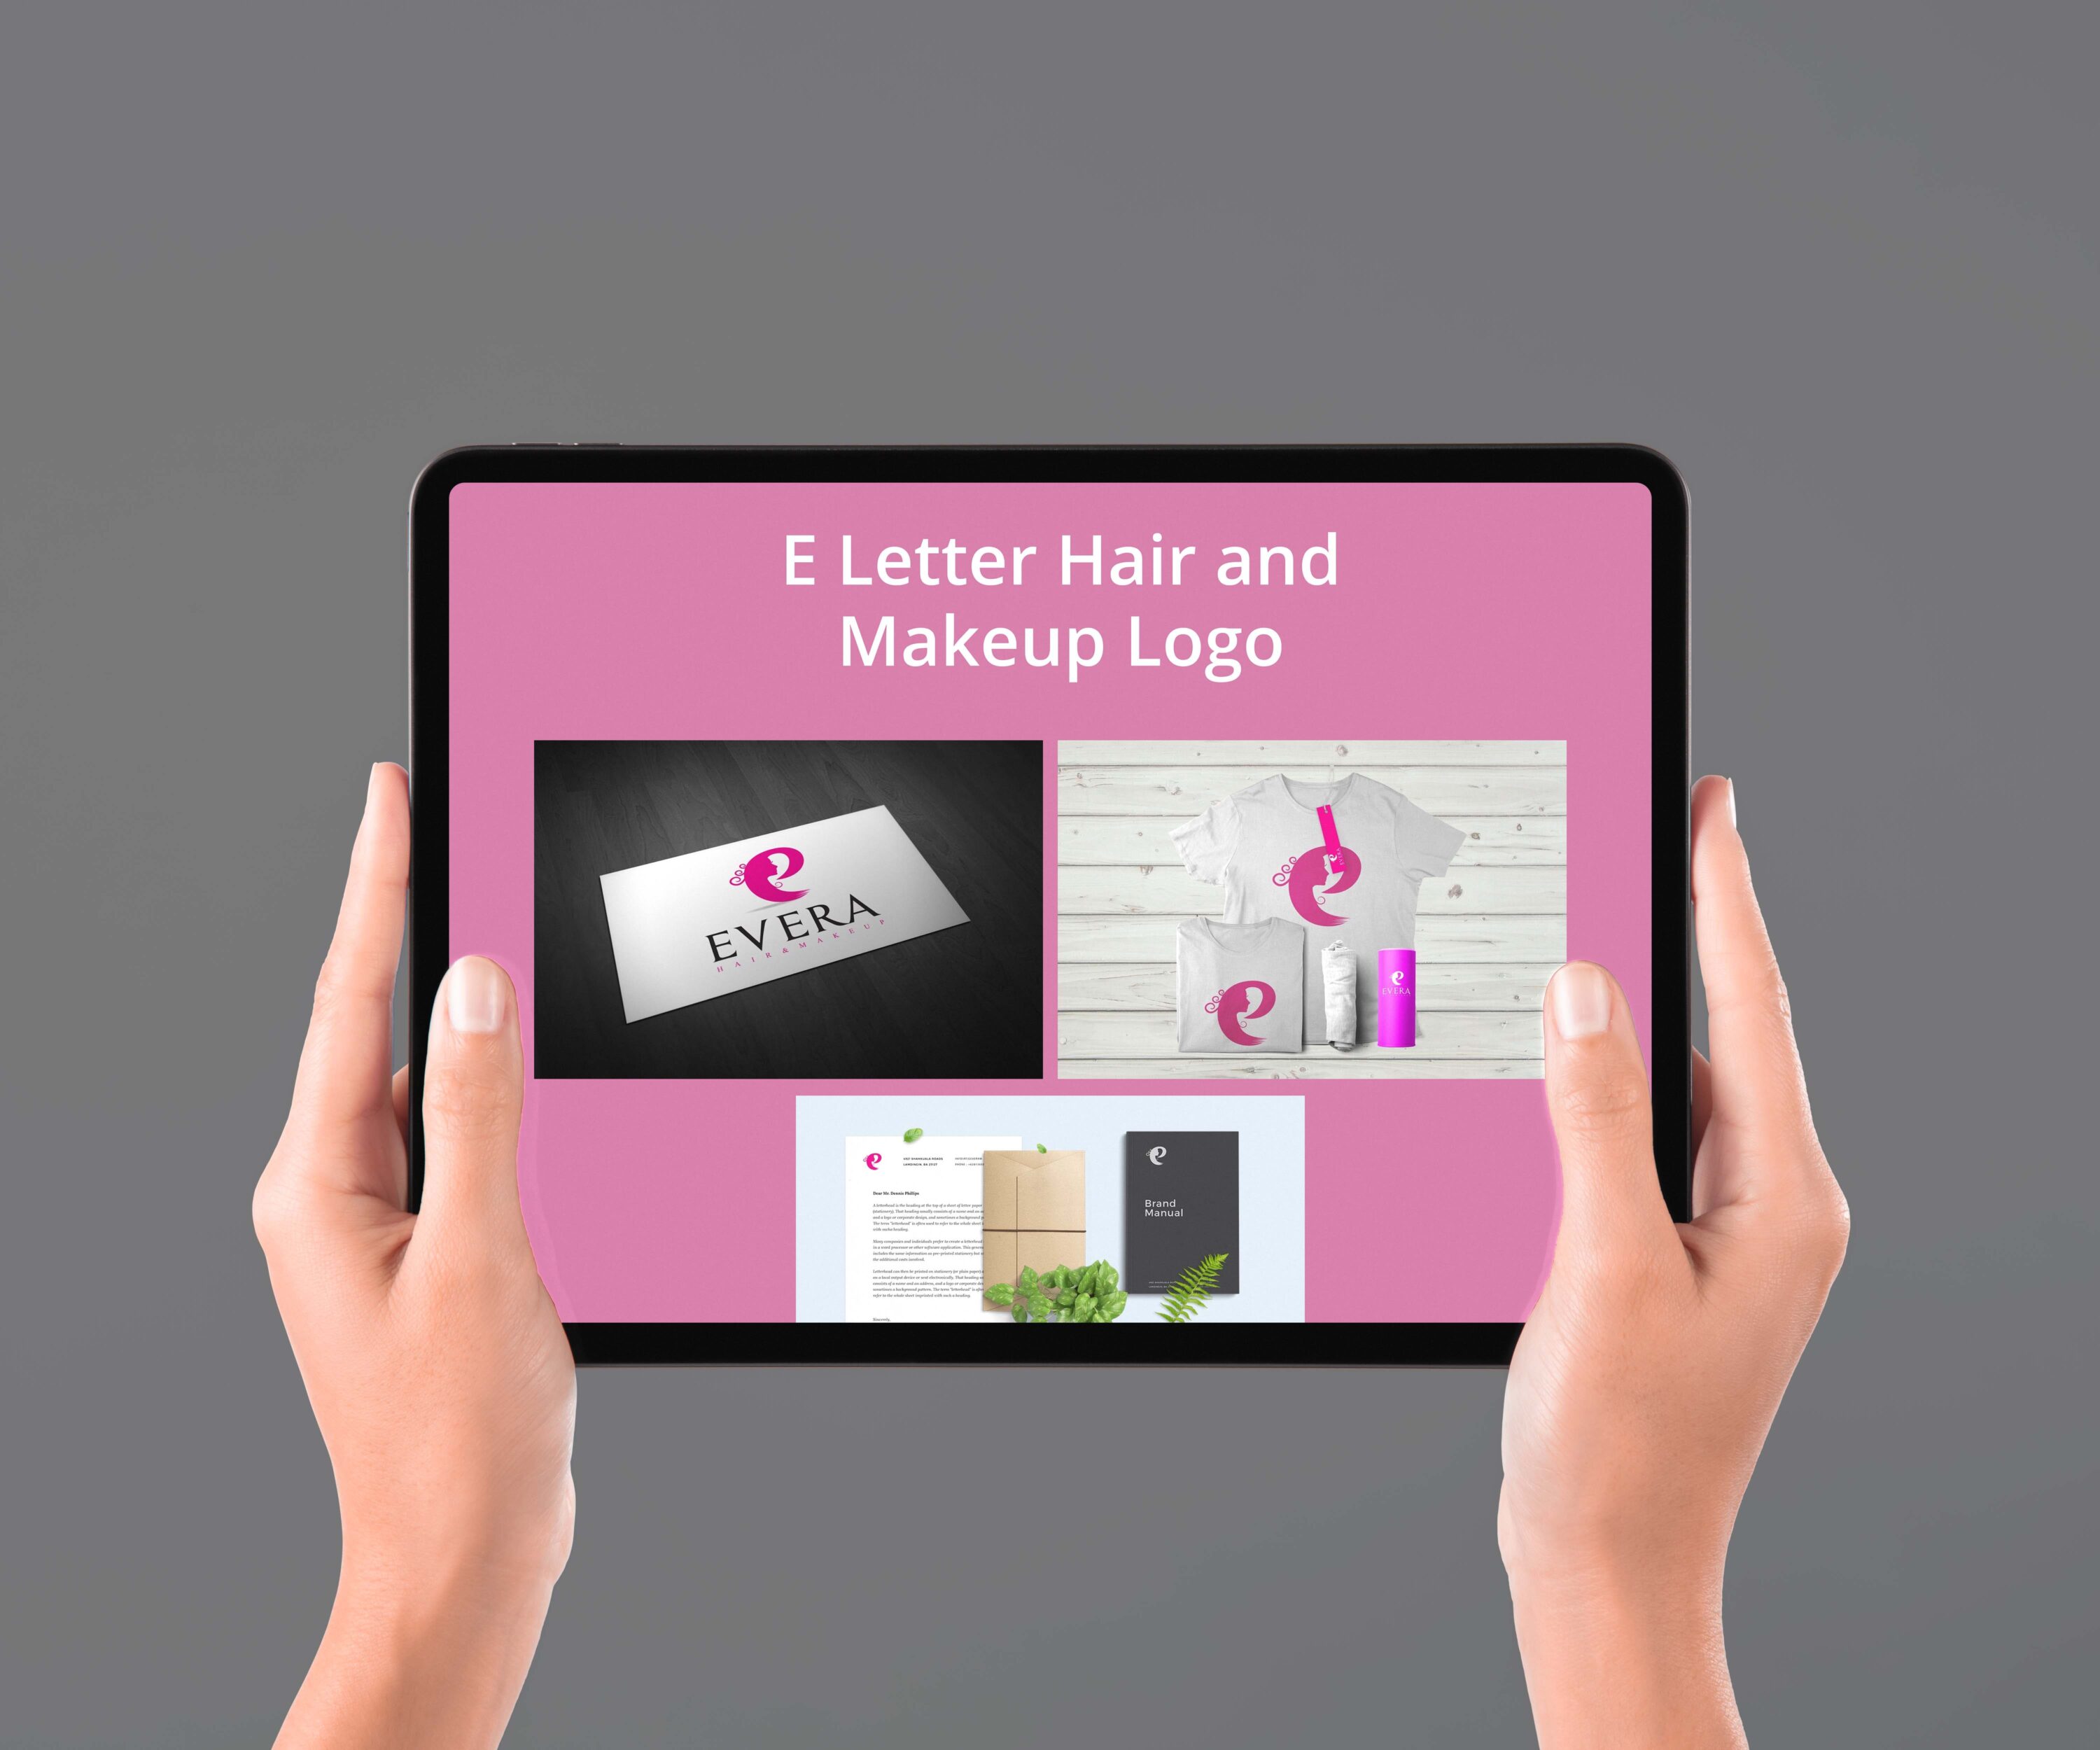 E Letter Hair and Makeup Logo tablet preview.